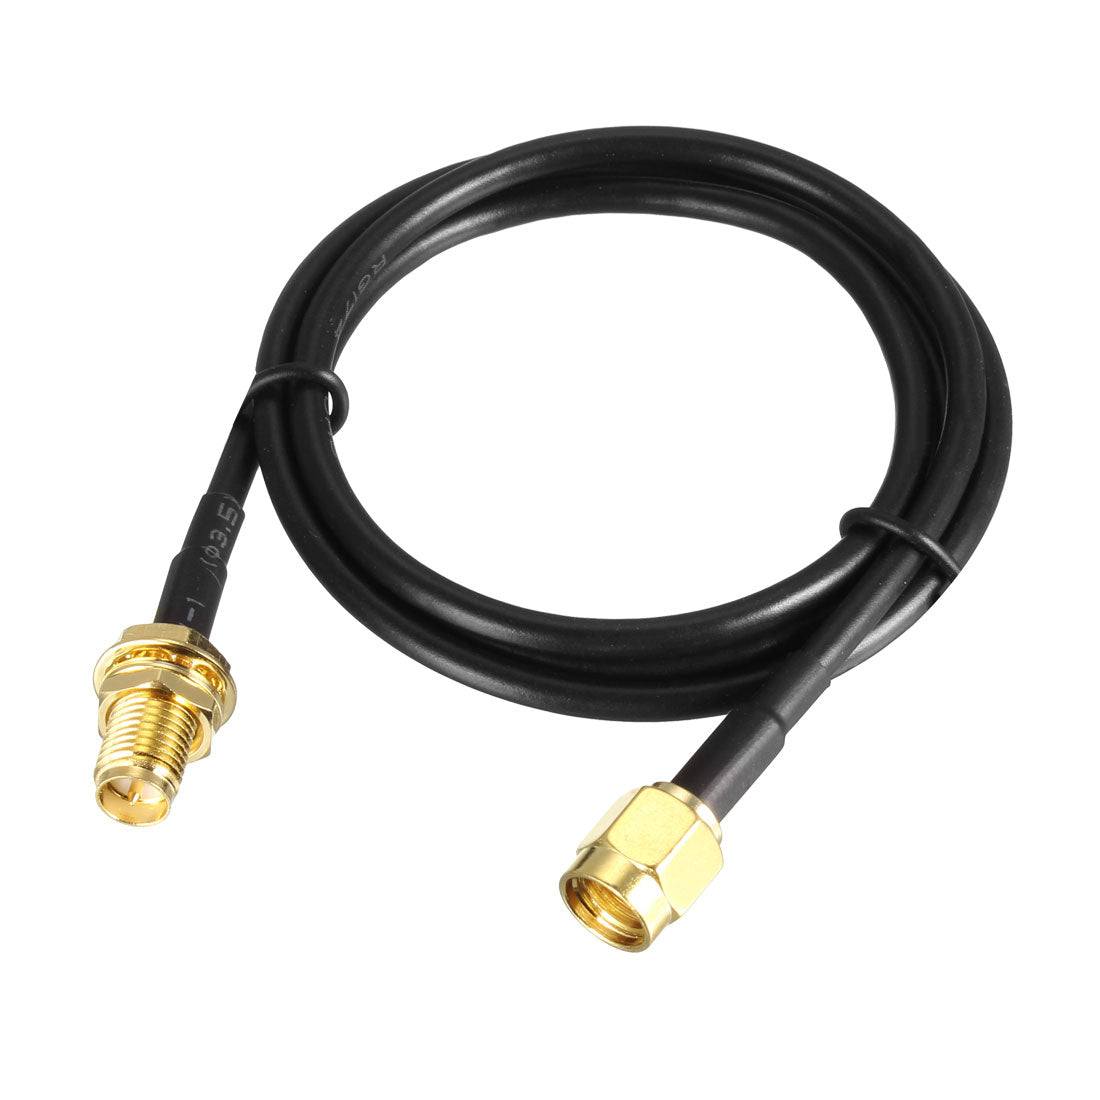 Uxcell Uxcell Antenna Extension Cable RP-SMA Male to RP-SMA Female Low Loss RG174 8 Ft